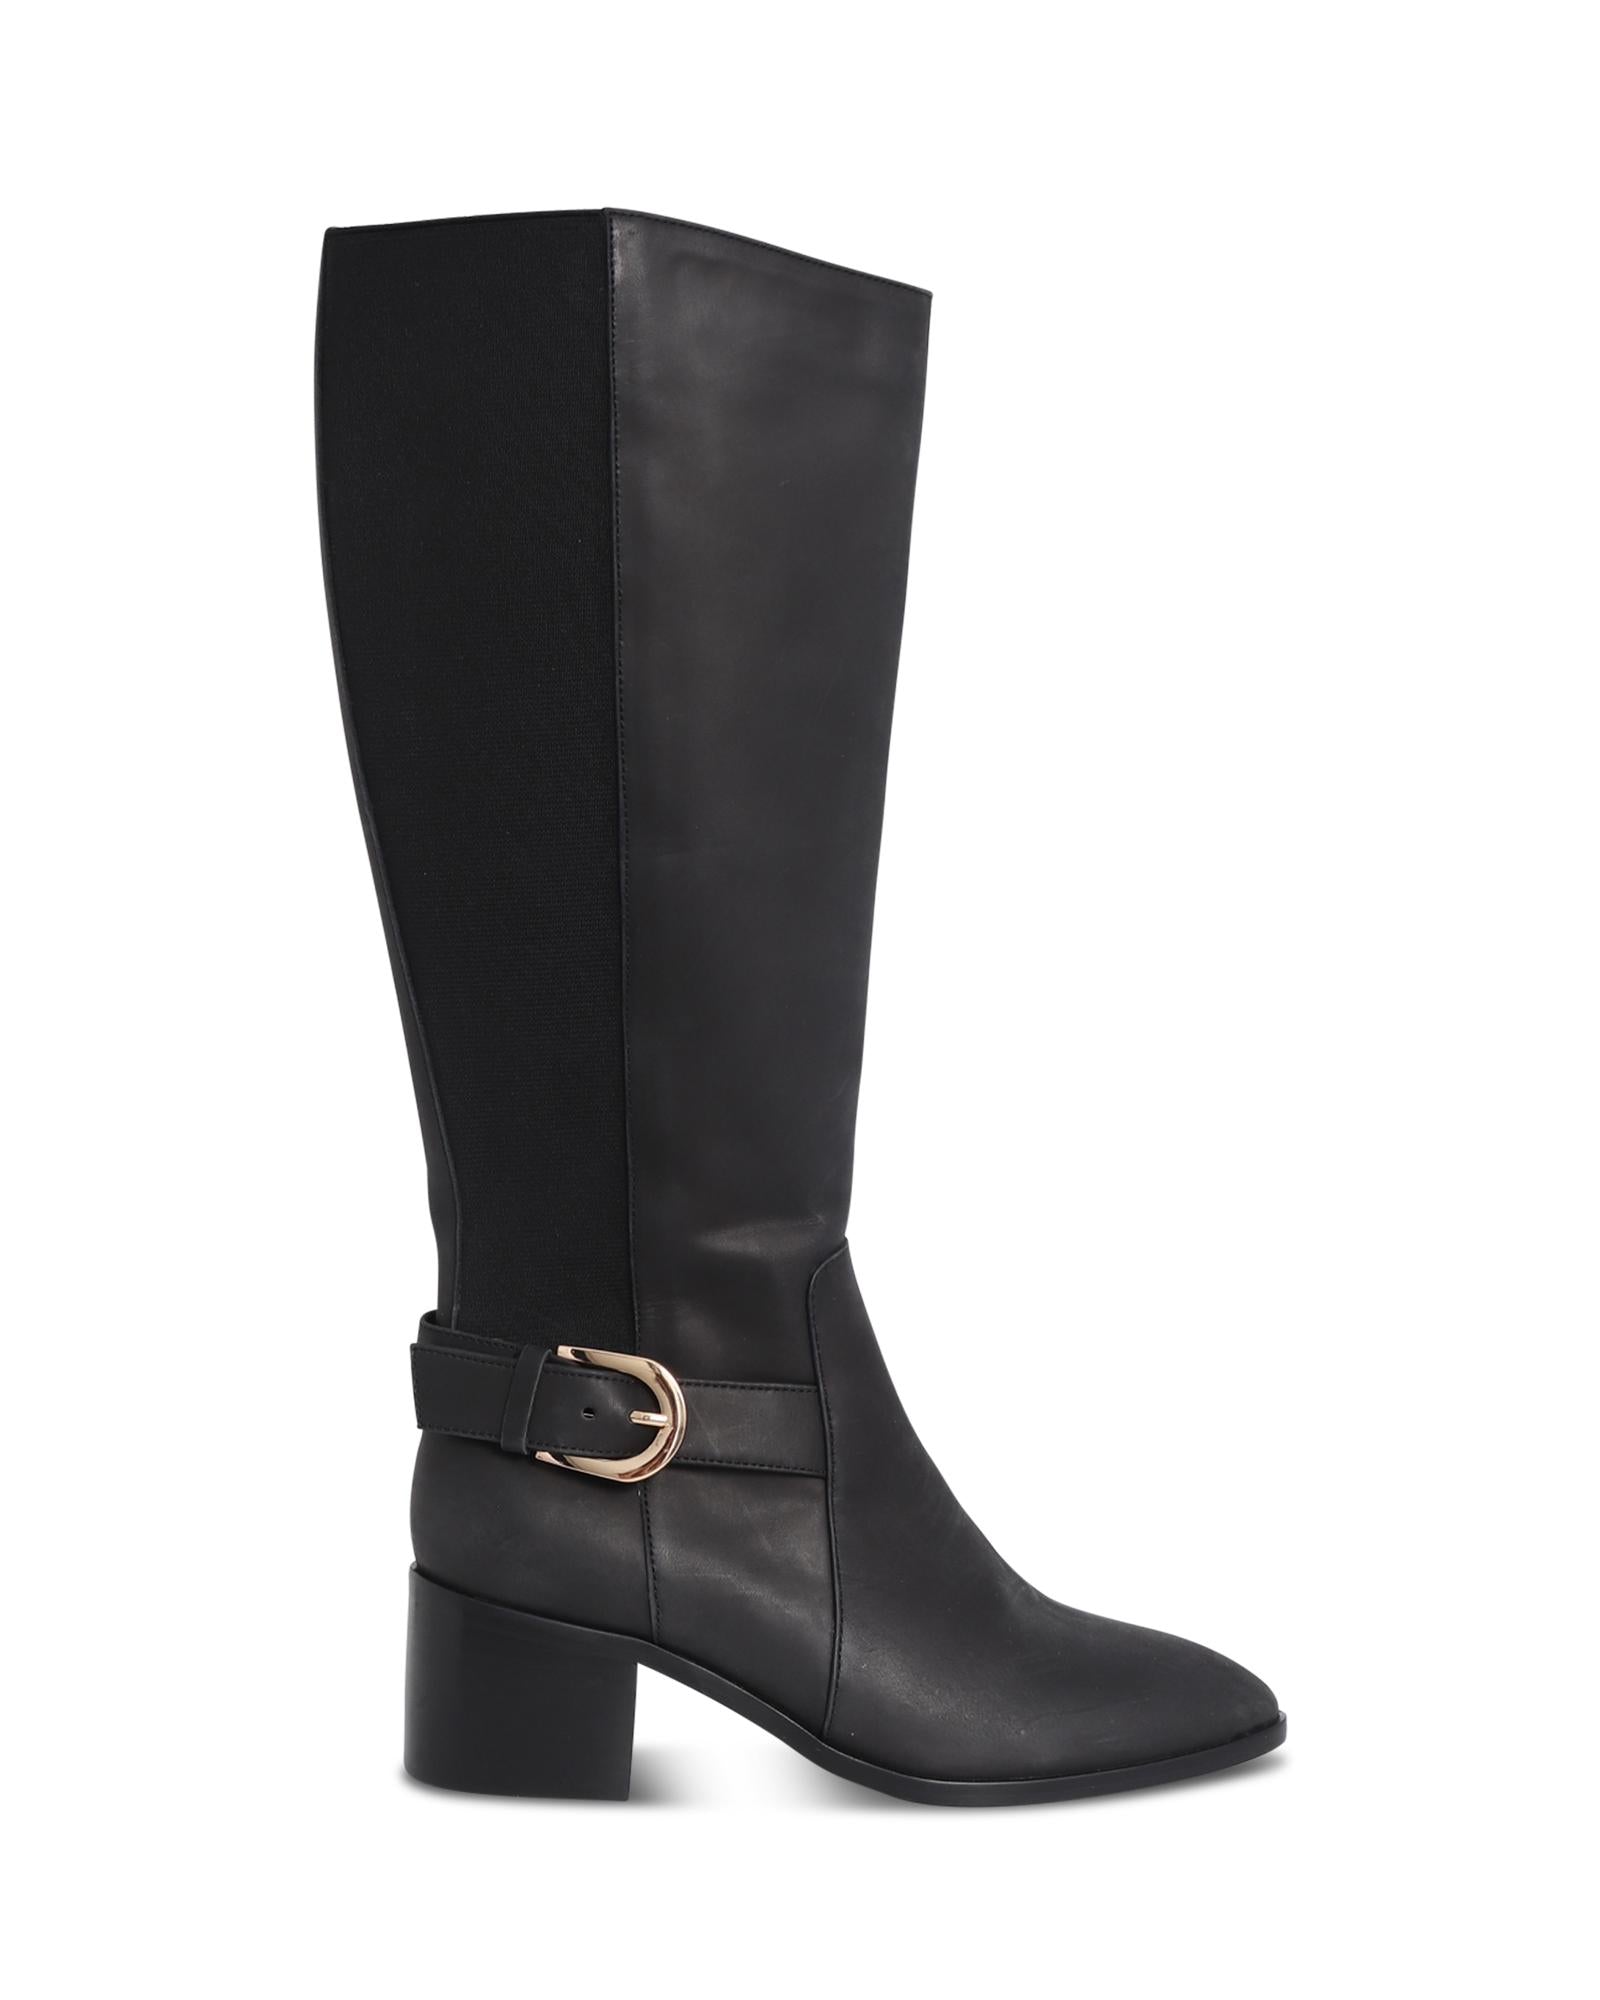 Nyla Black 6cm Knee-High Boot with Elasticated Gusset and Gold Buckle 